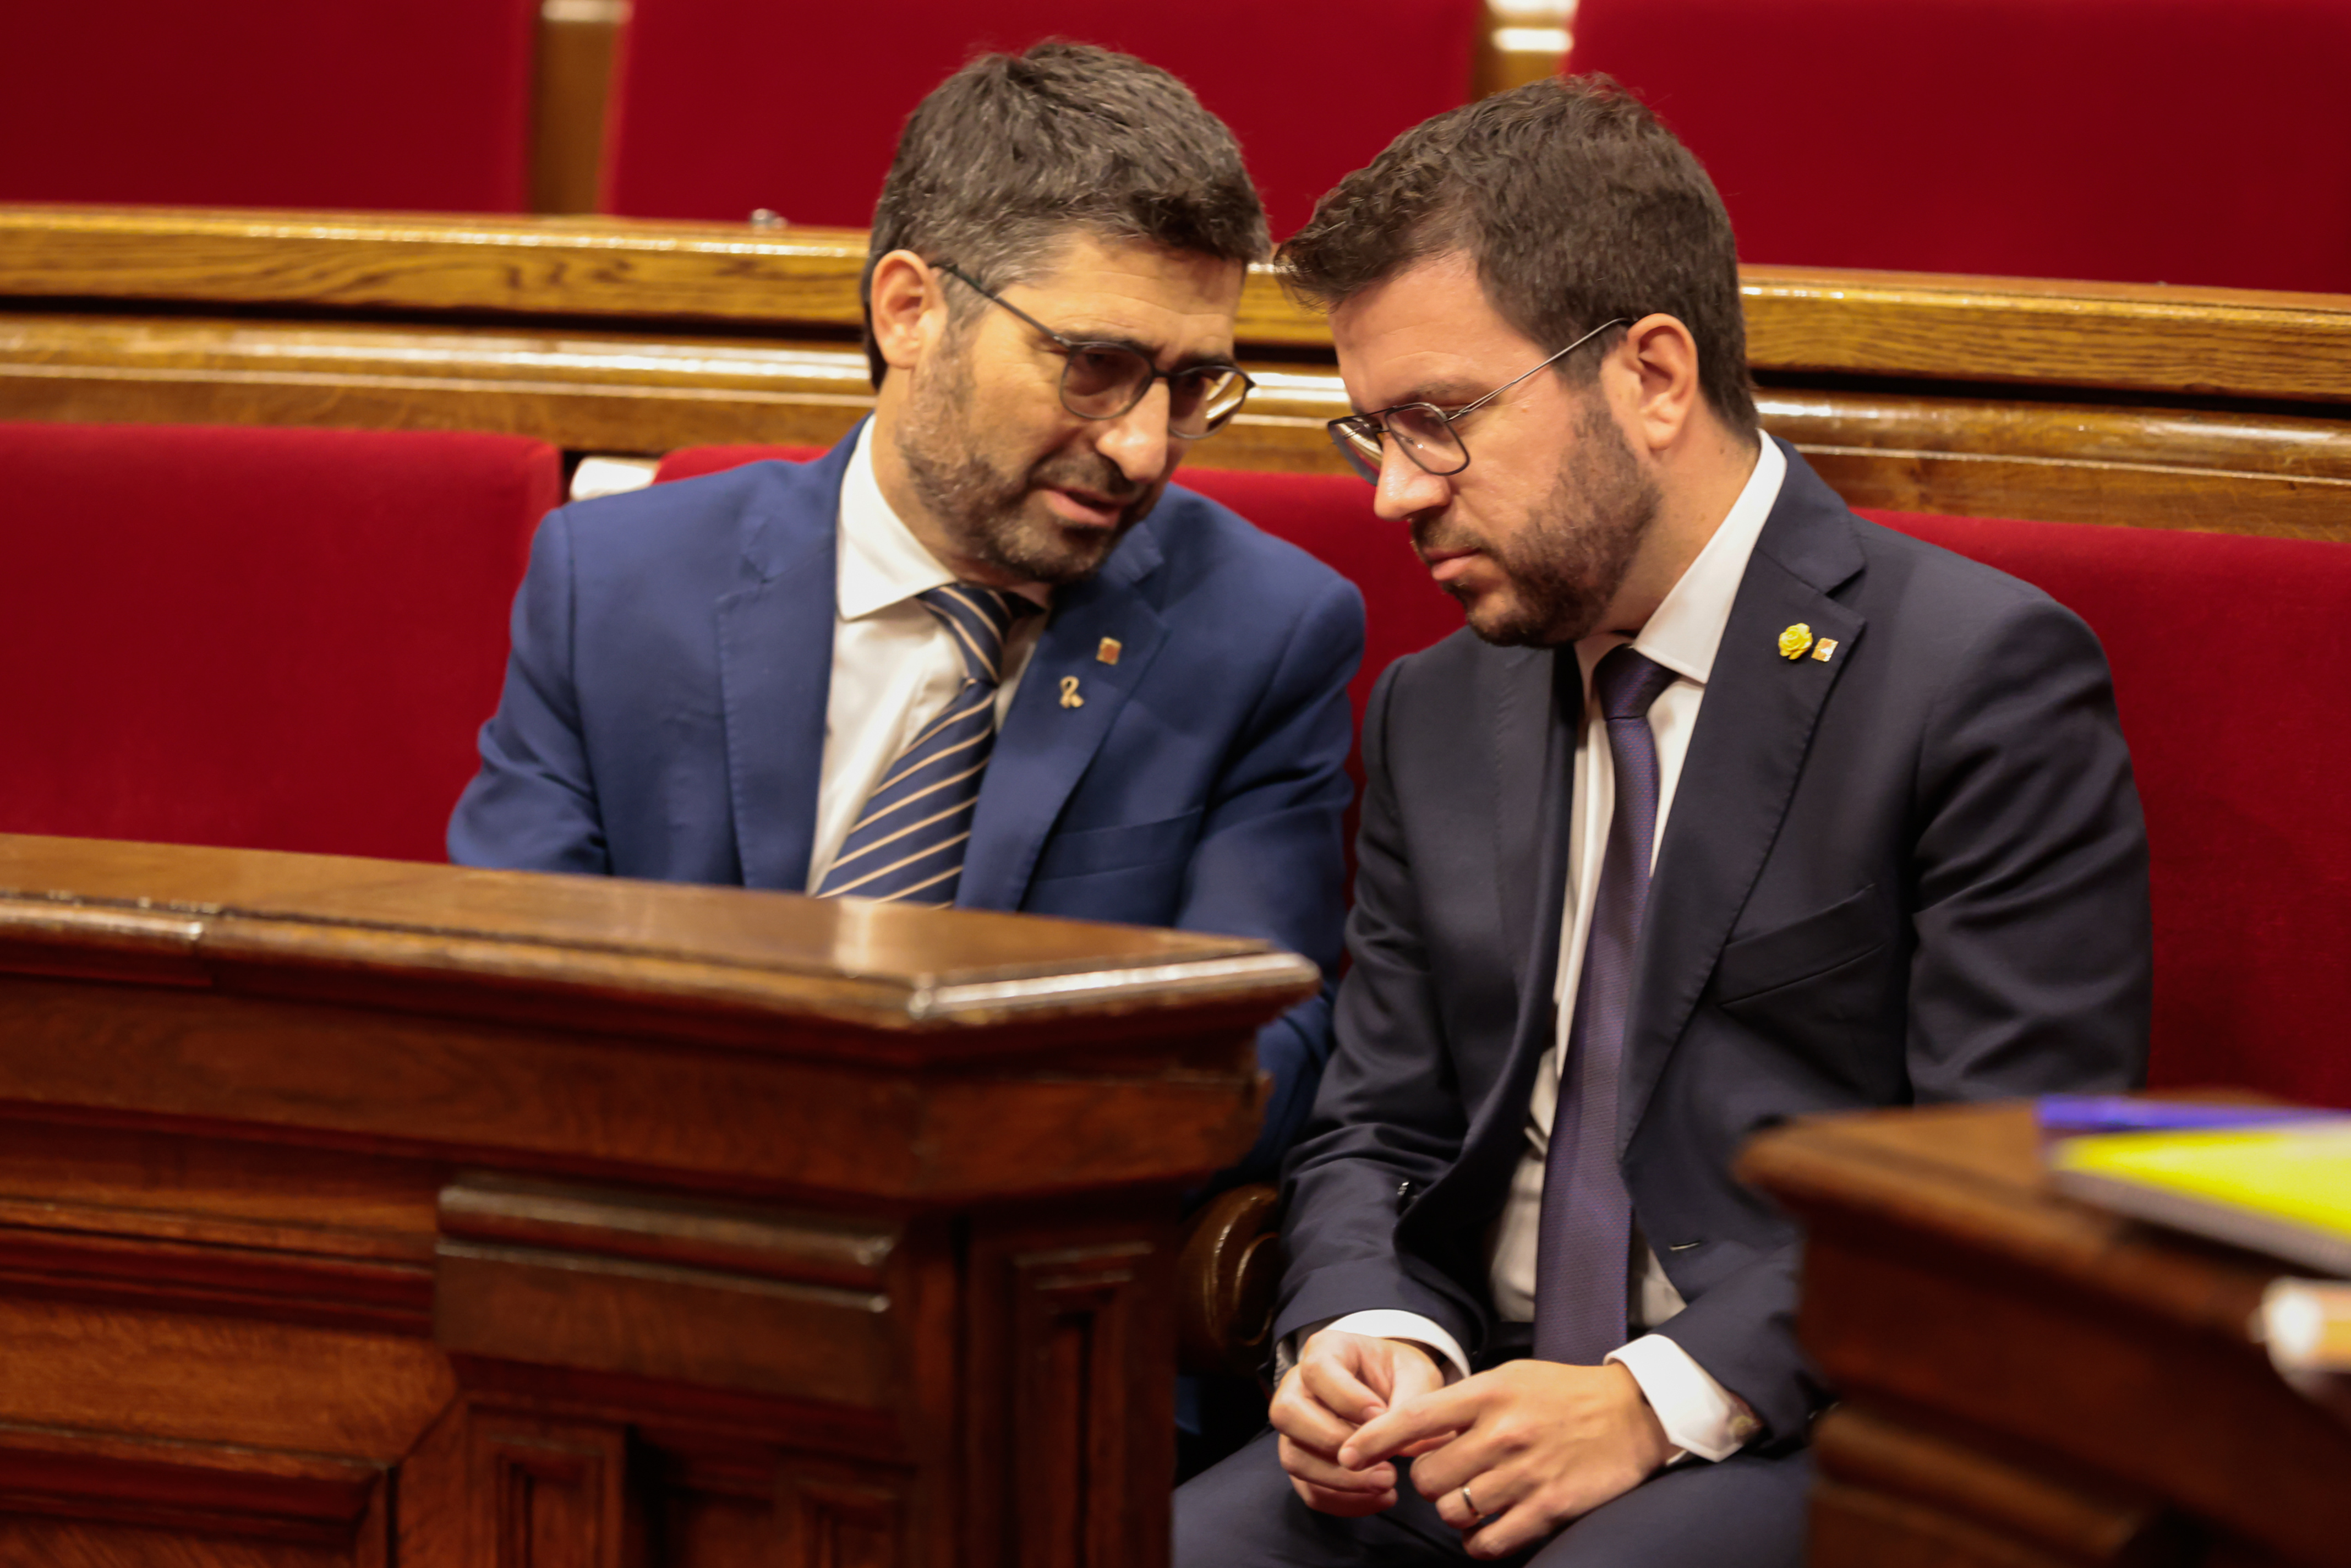 Catalan president Pere Aragonès speaks with vice president Jordi Puigneró during the general policy debate on September 28, 2022